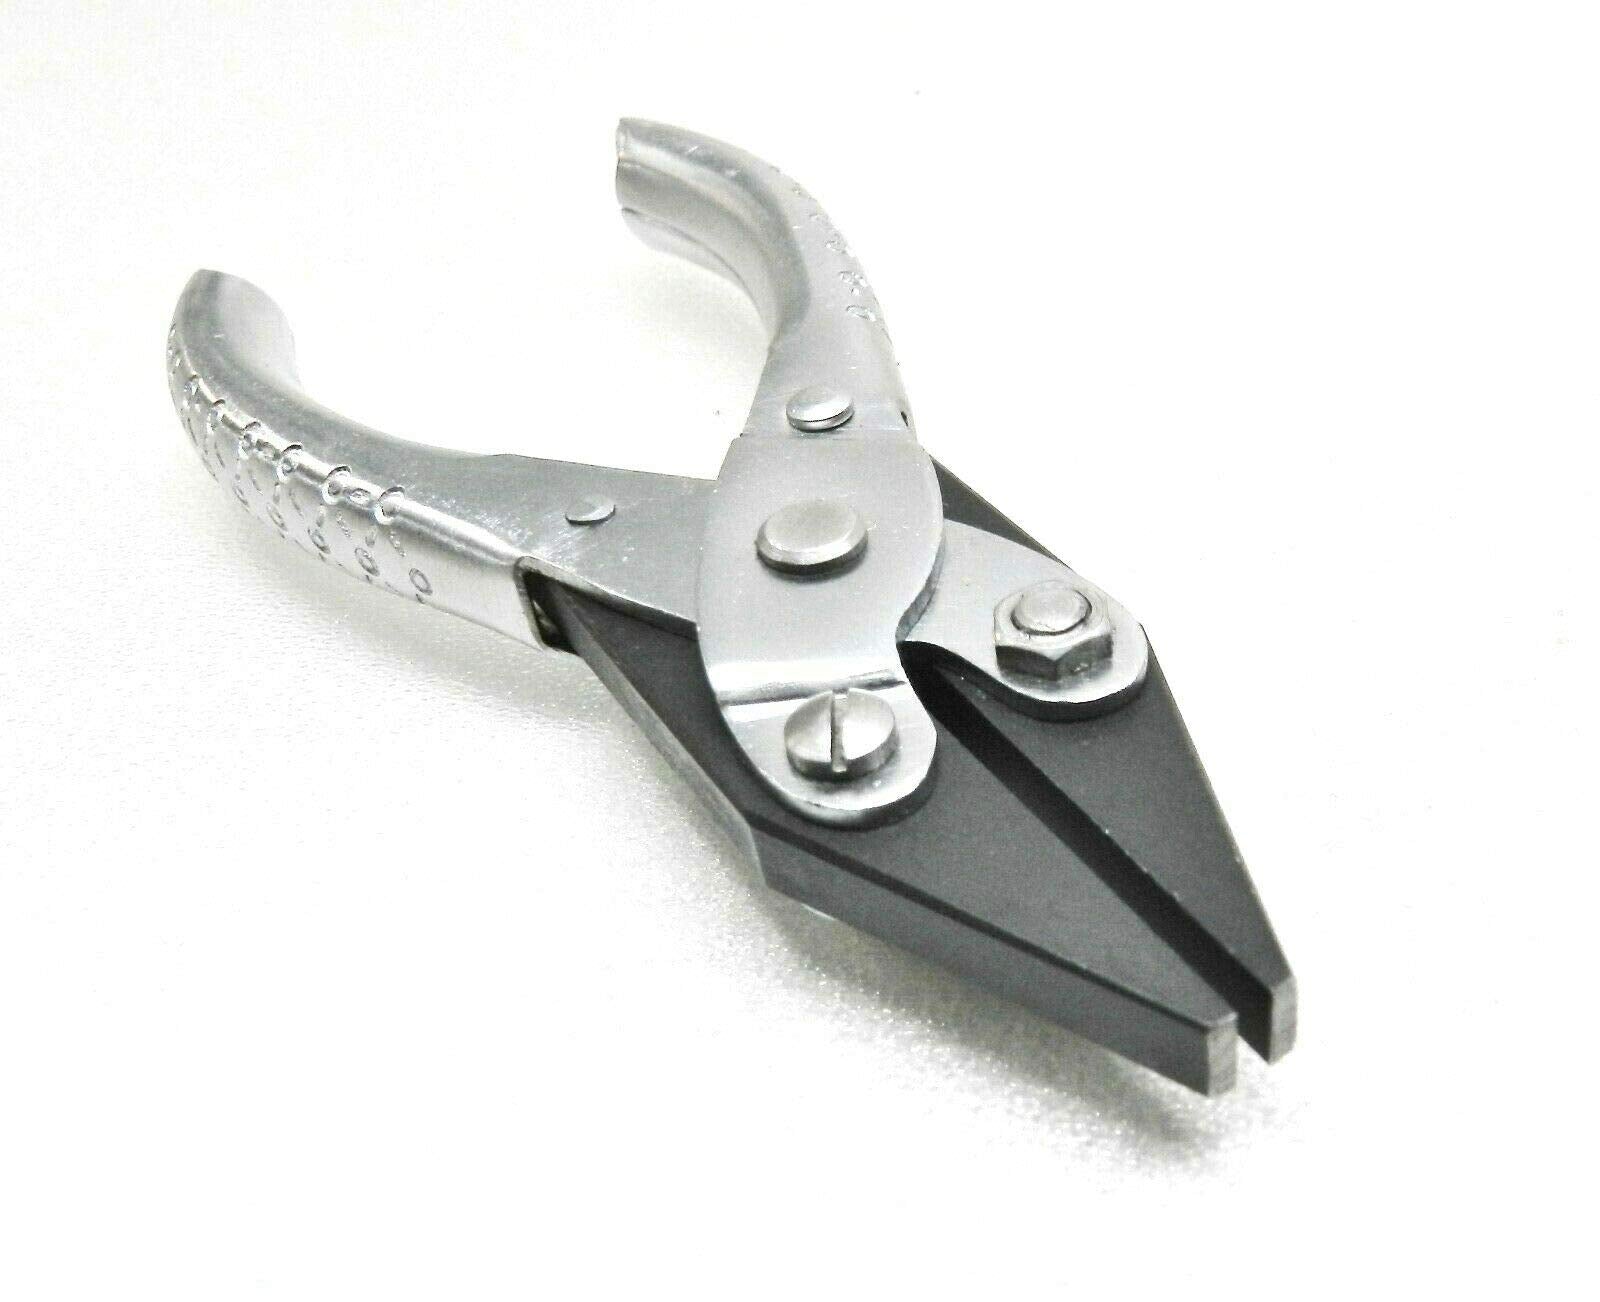 Parallel Action Pliers Flat Nose Smooth Jaw 5 - 125mm Jewelry Parallel  Plier